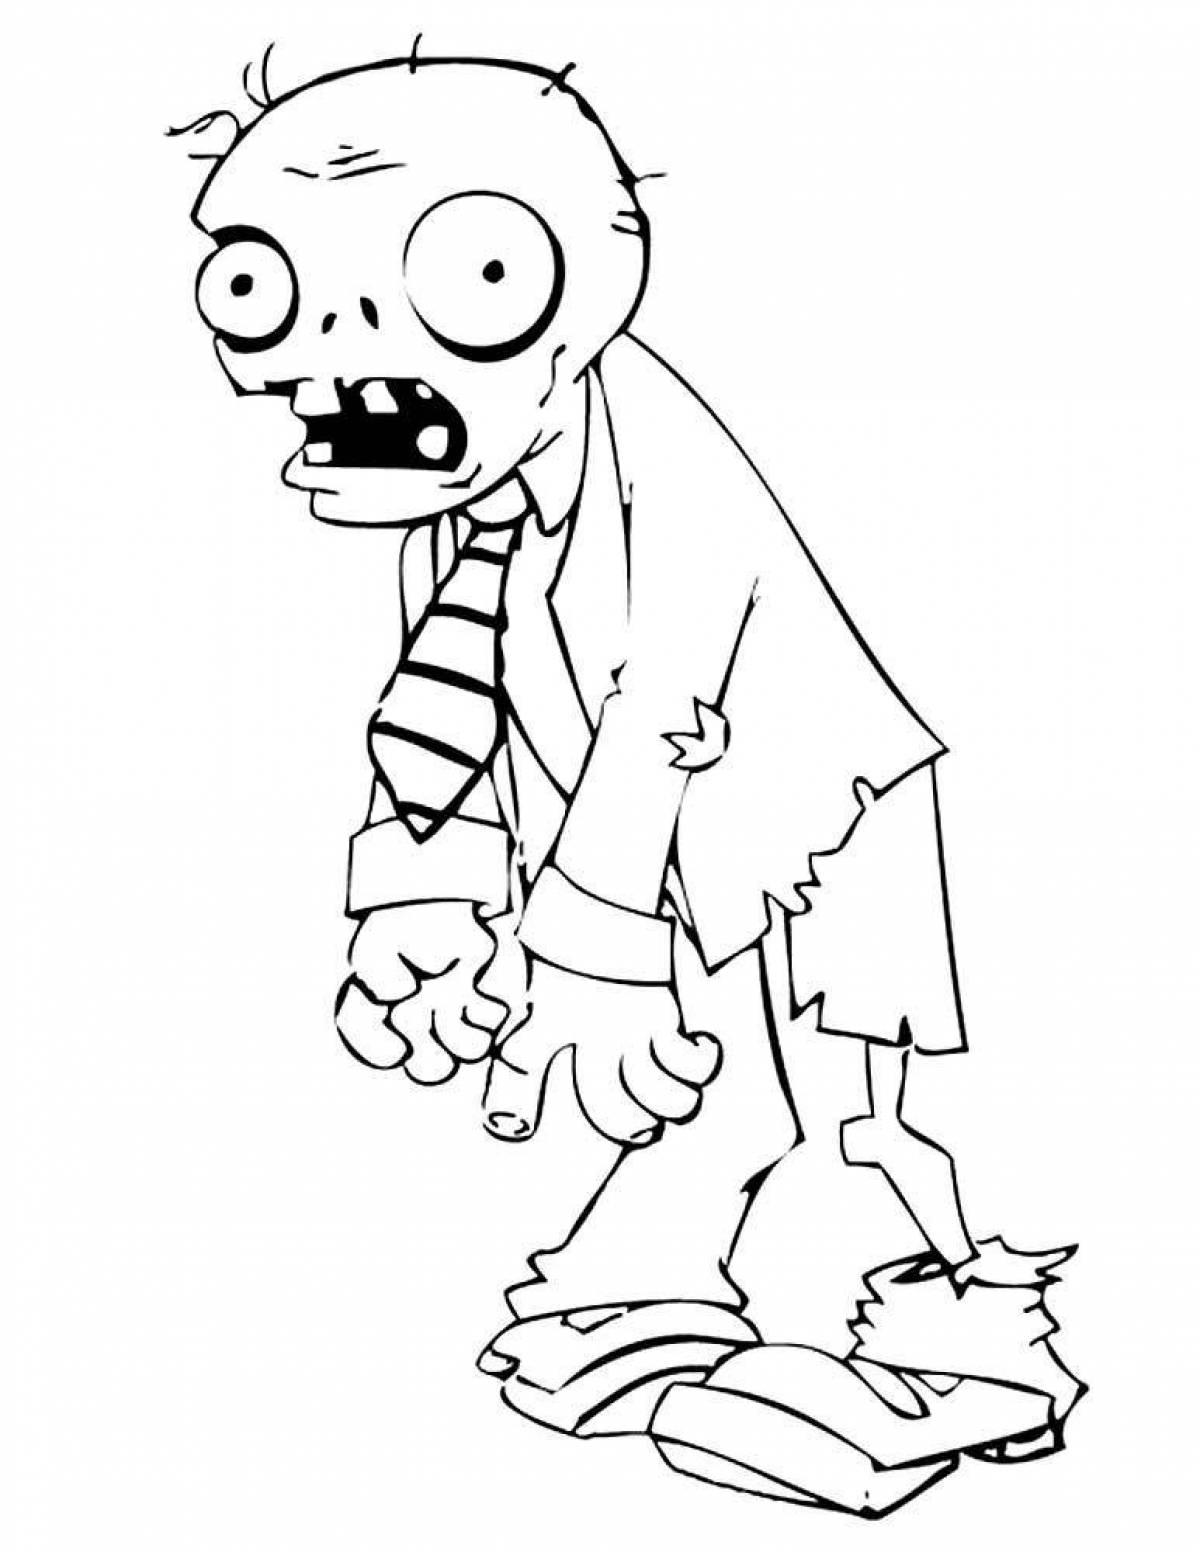 Ghast zombie sketchers coloring page